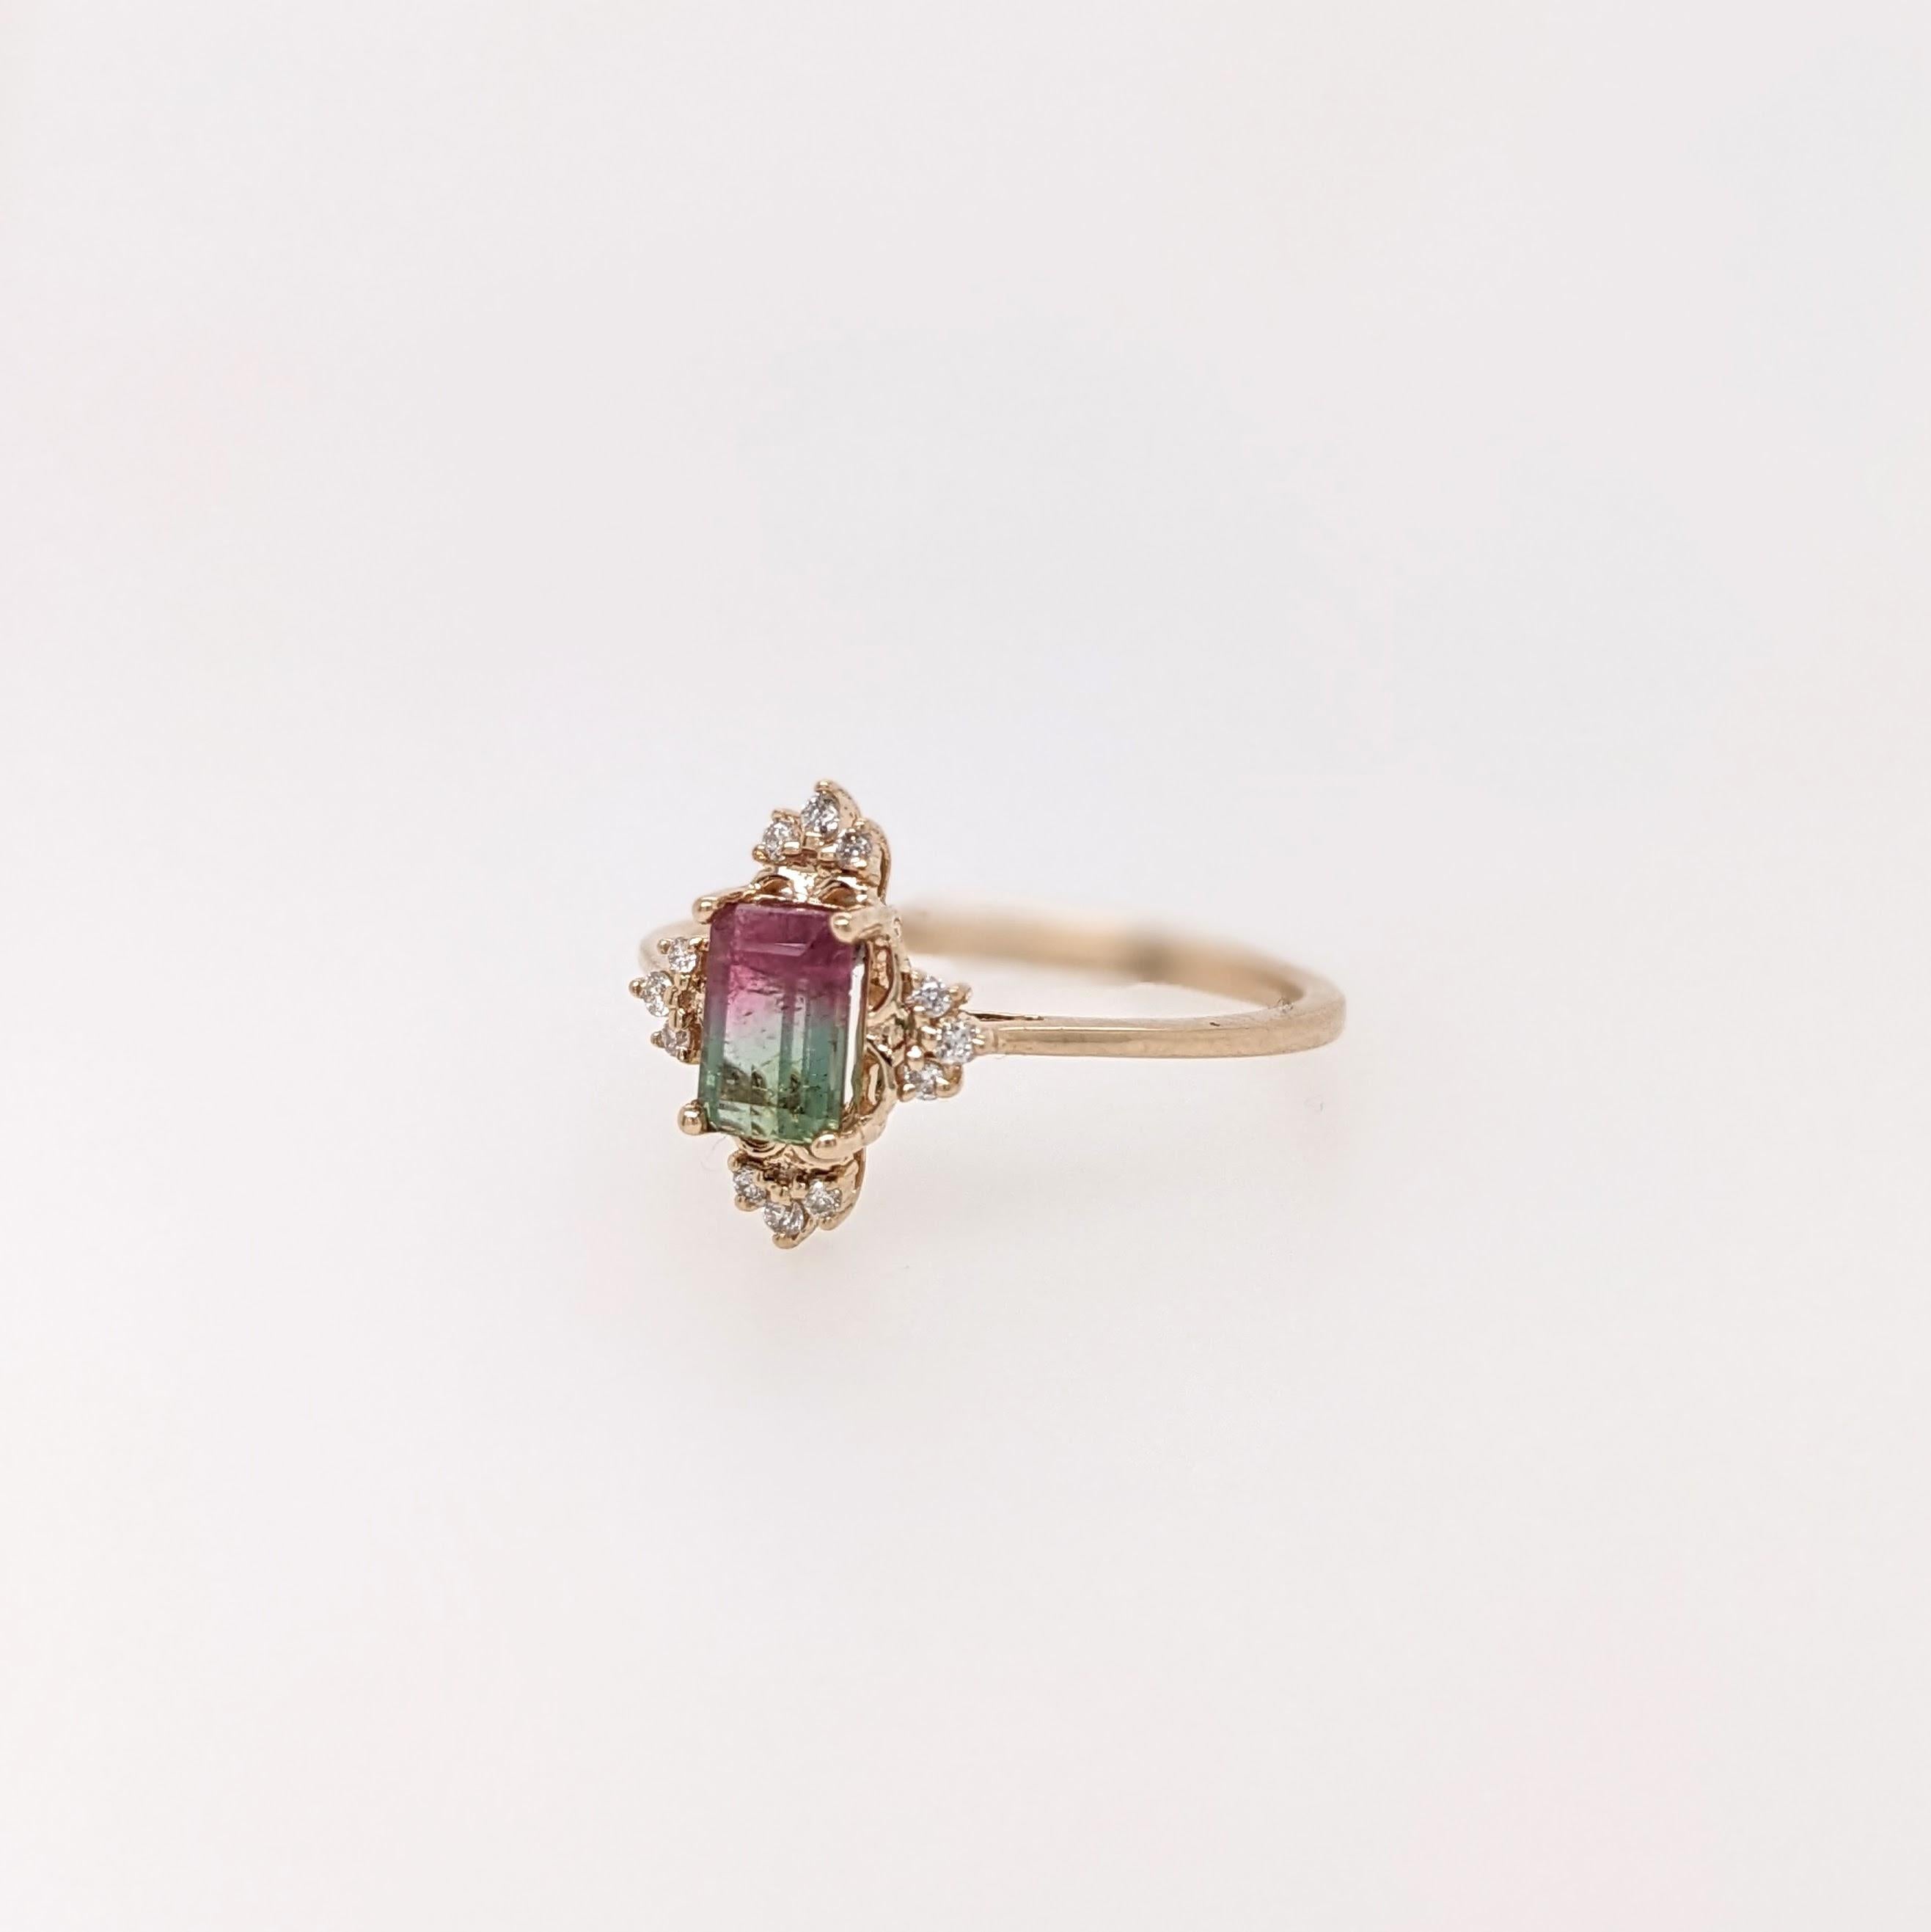 This ring features a beautiful watermelon tourmaline in 14k gold with natural earth-mined diamonds. A gorgeous modern look that's perfectly balanced between minimalist and glamour. This ring can be a beautiful October birthstone for your loved ones!